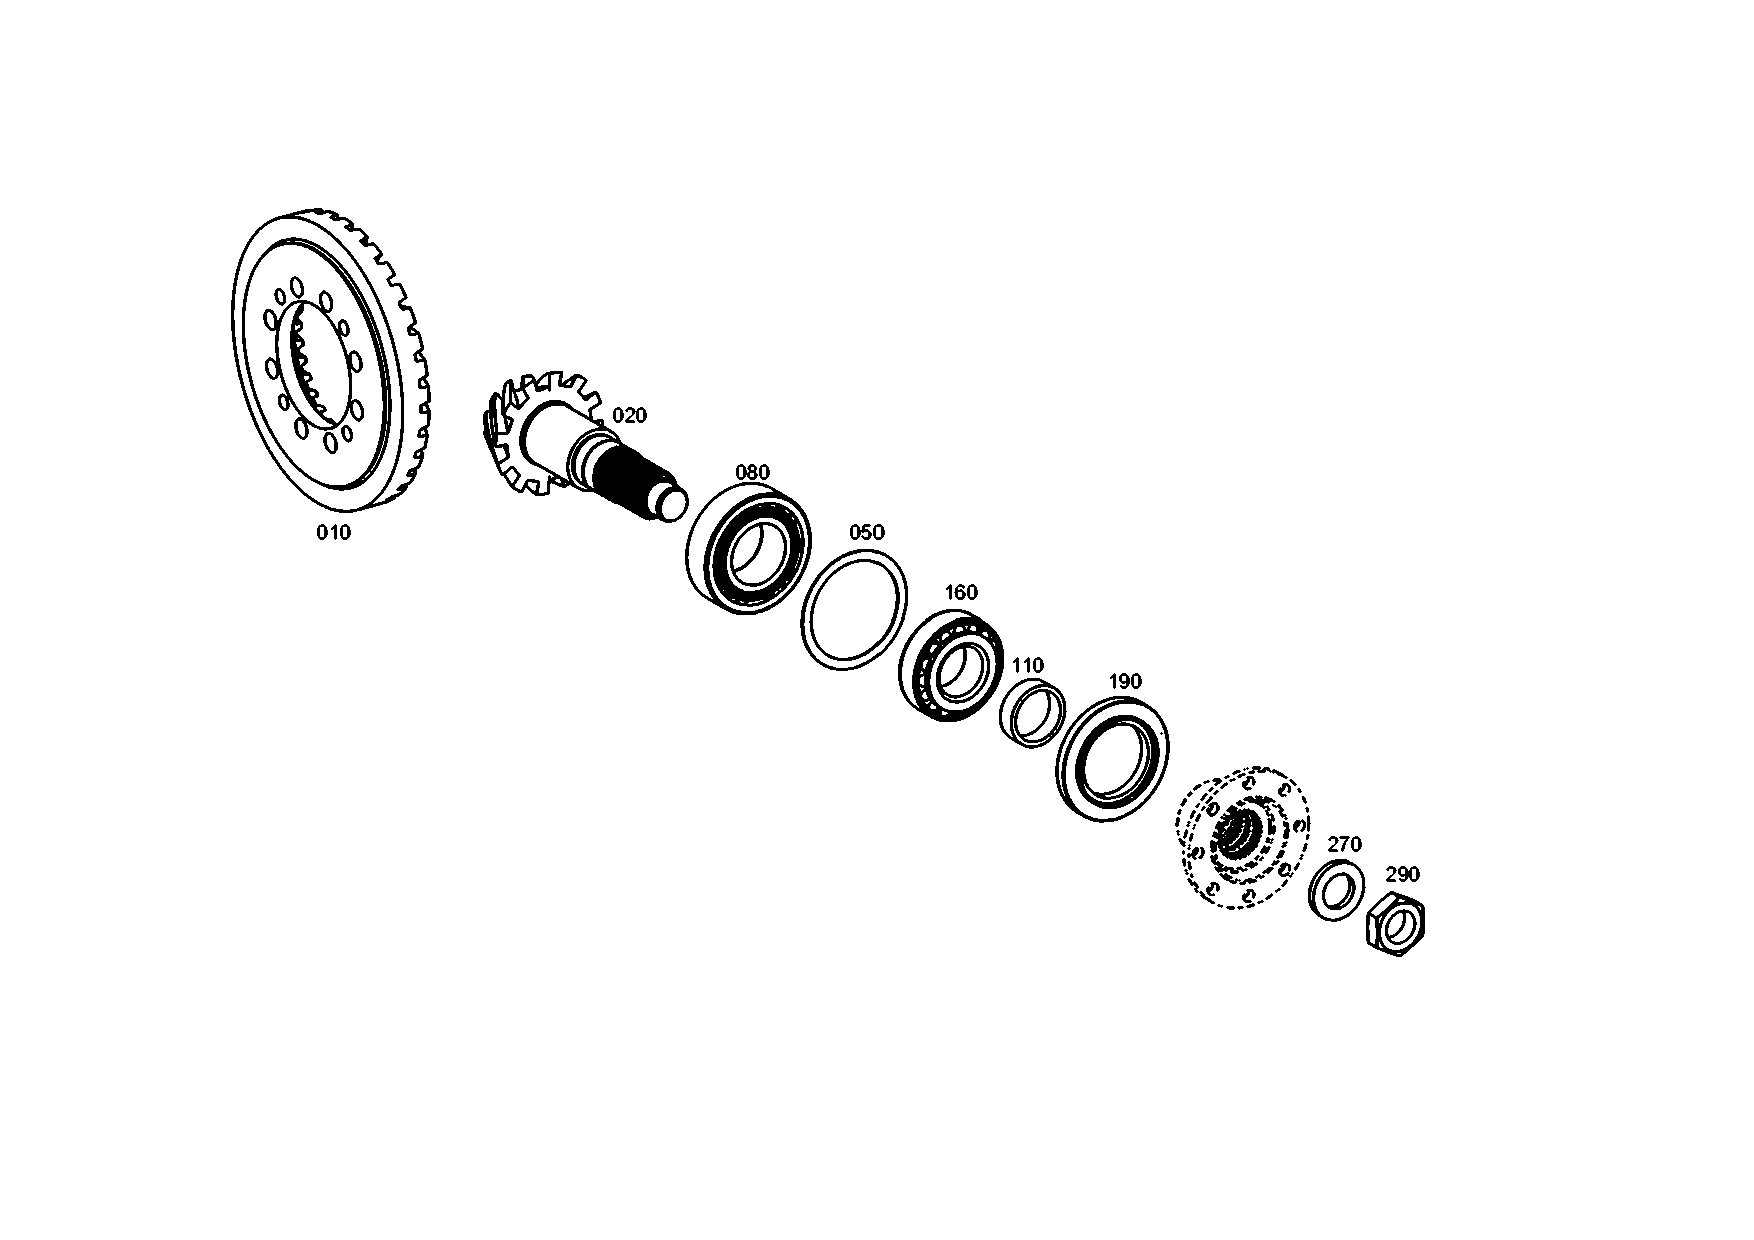 drawing for CATERPILLAR INC. 7029699 - RING (figure 1)